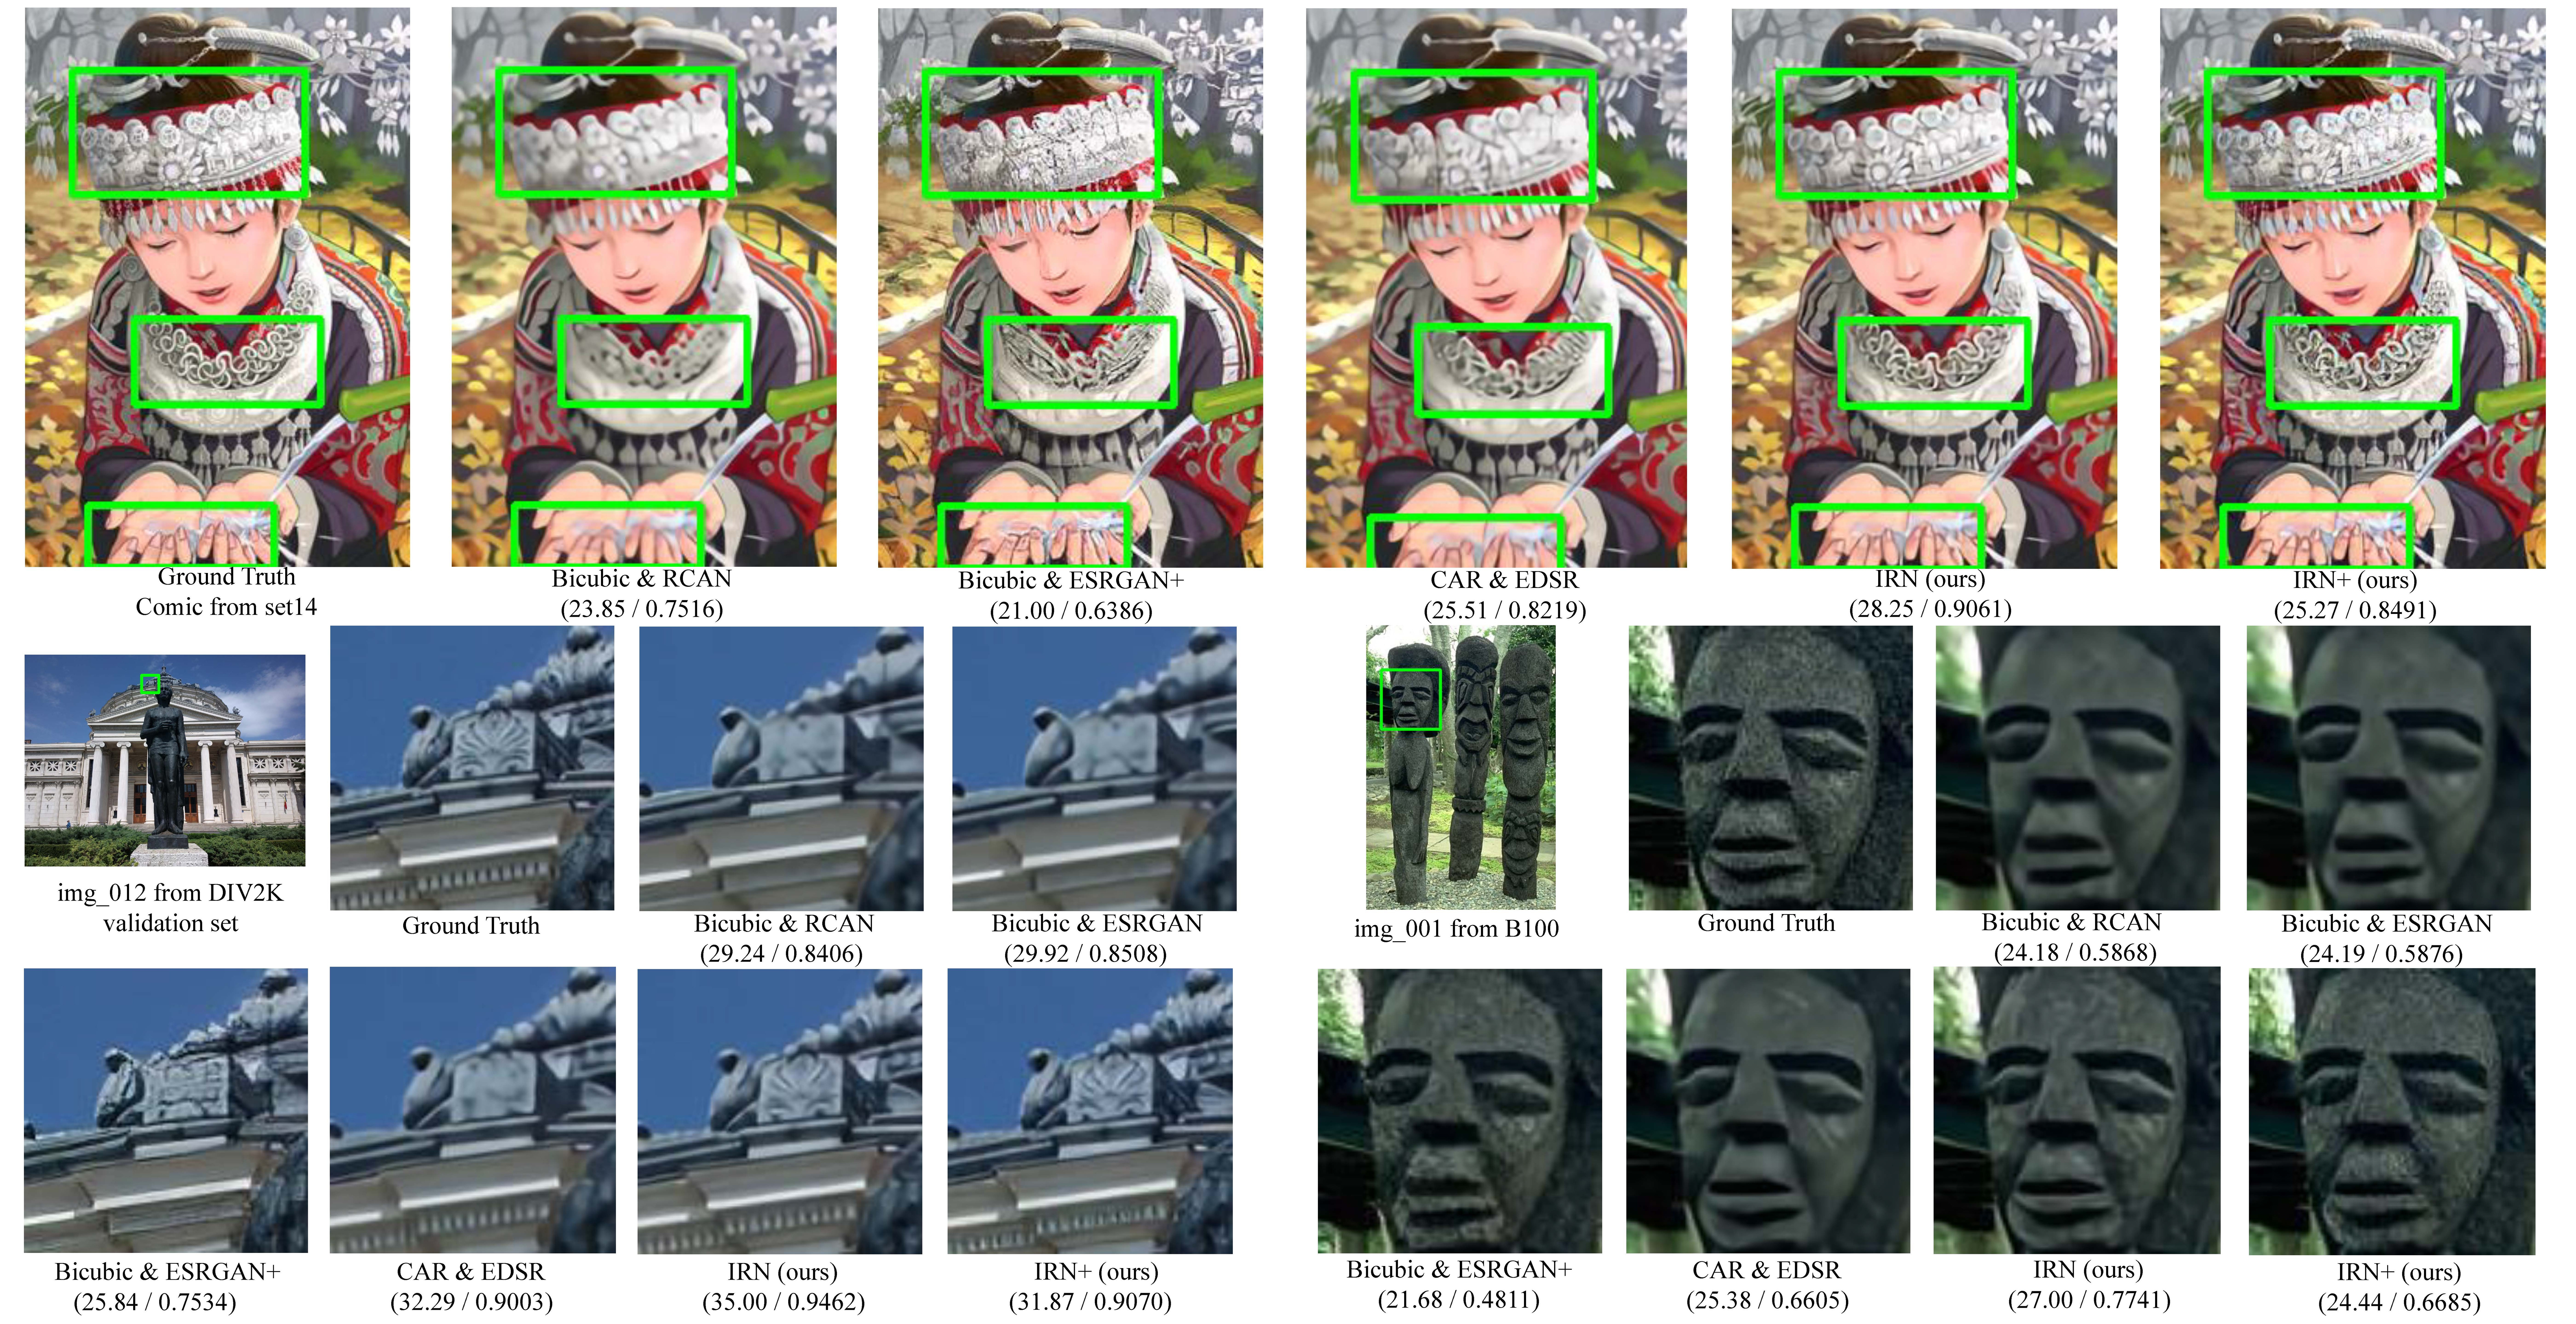 Qualitative results of upscaling the 4x downscaled images